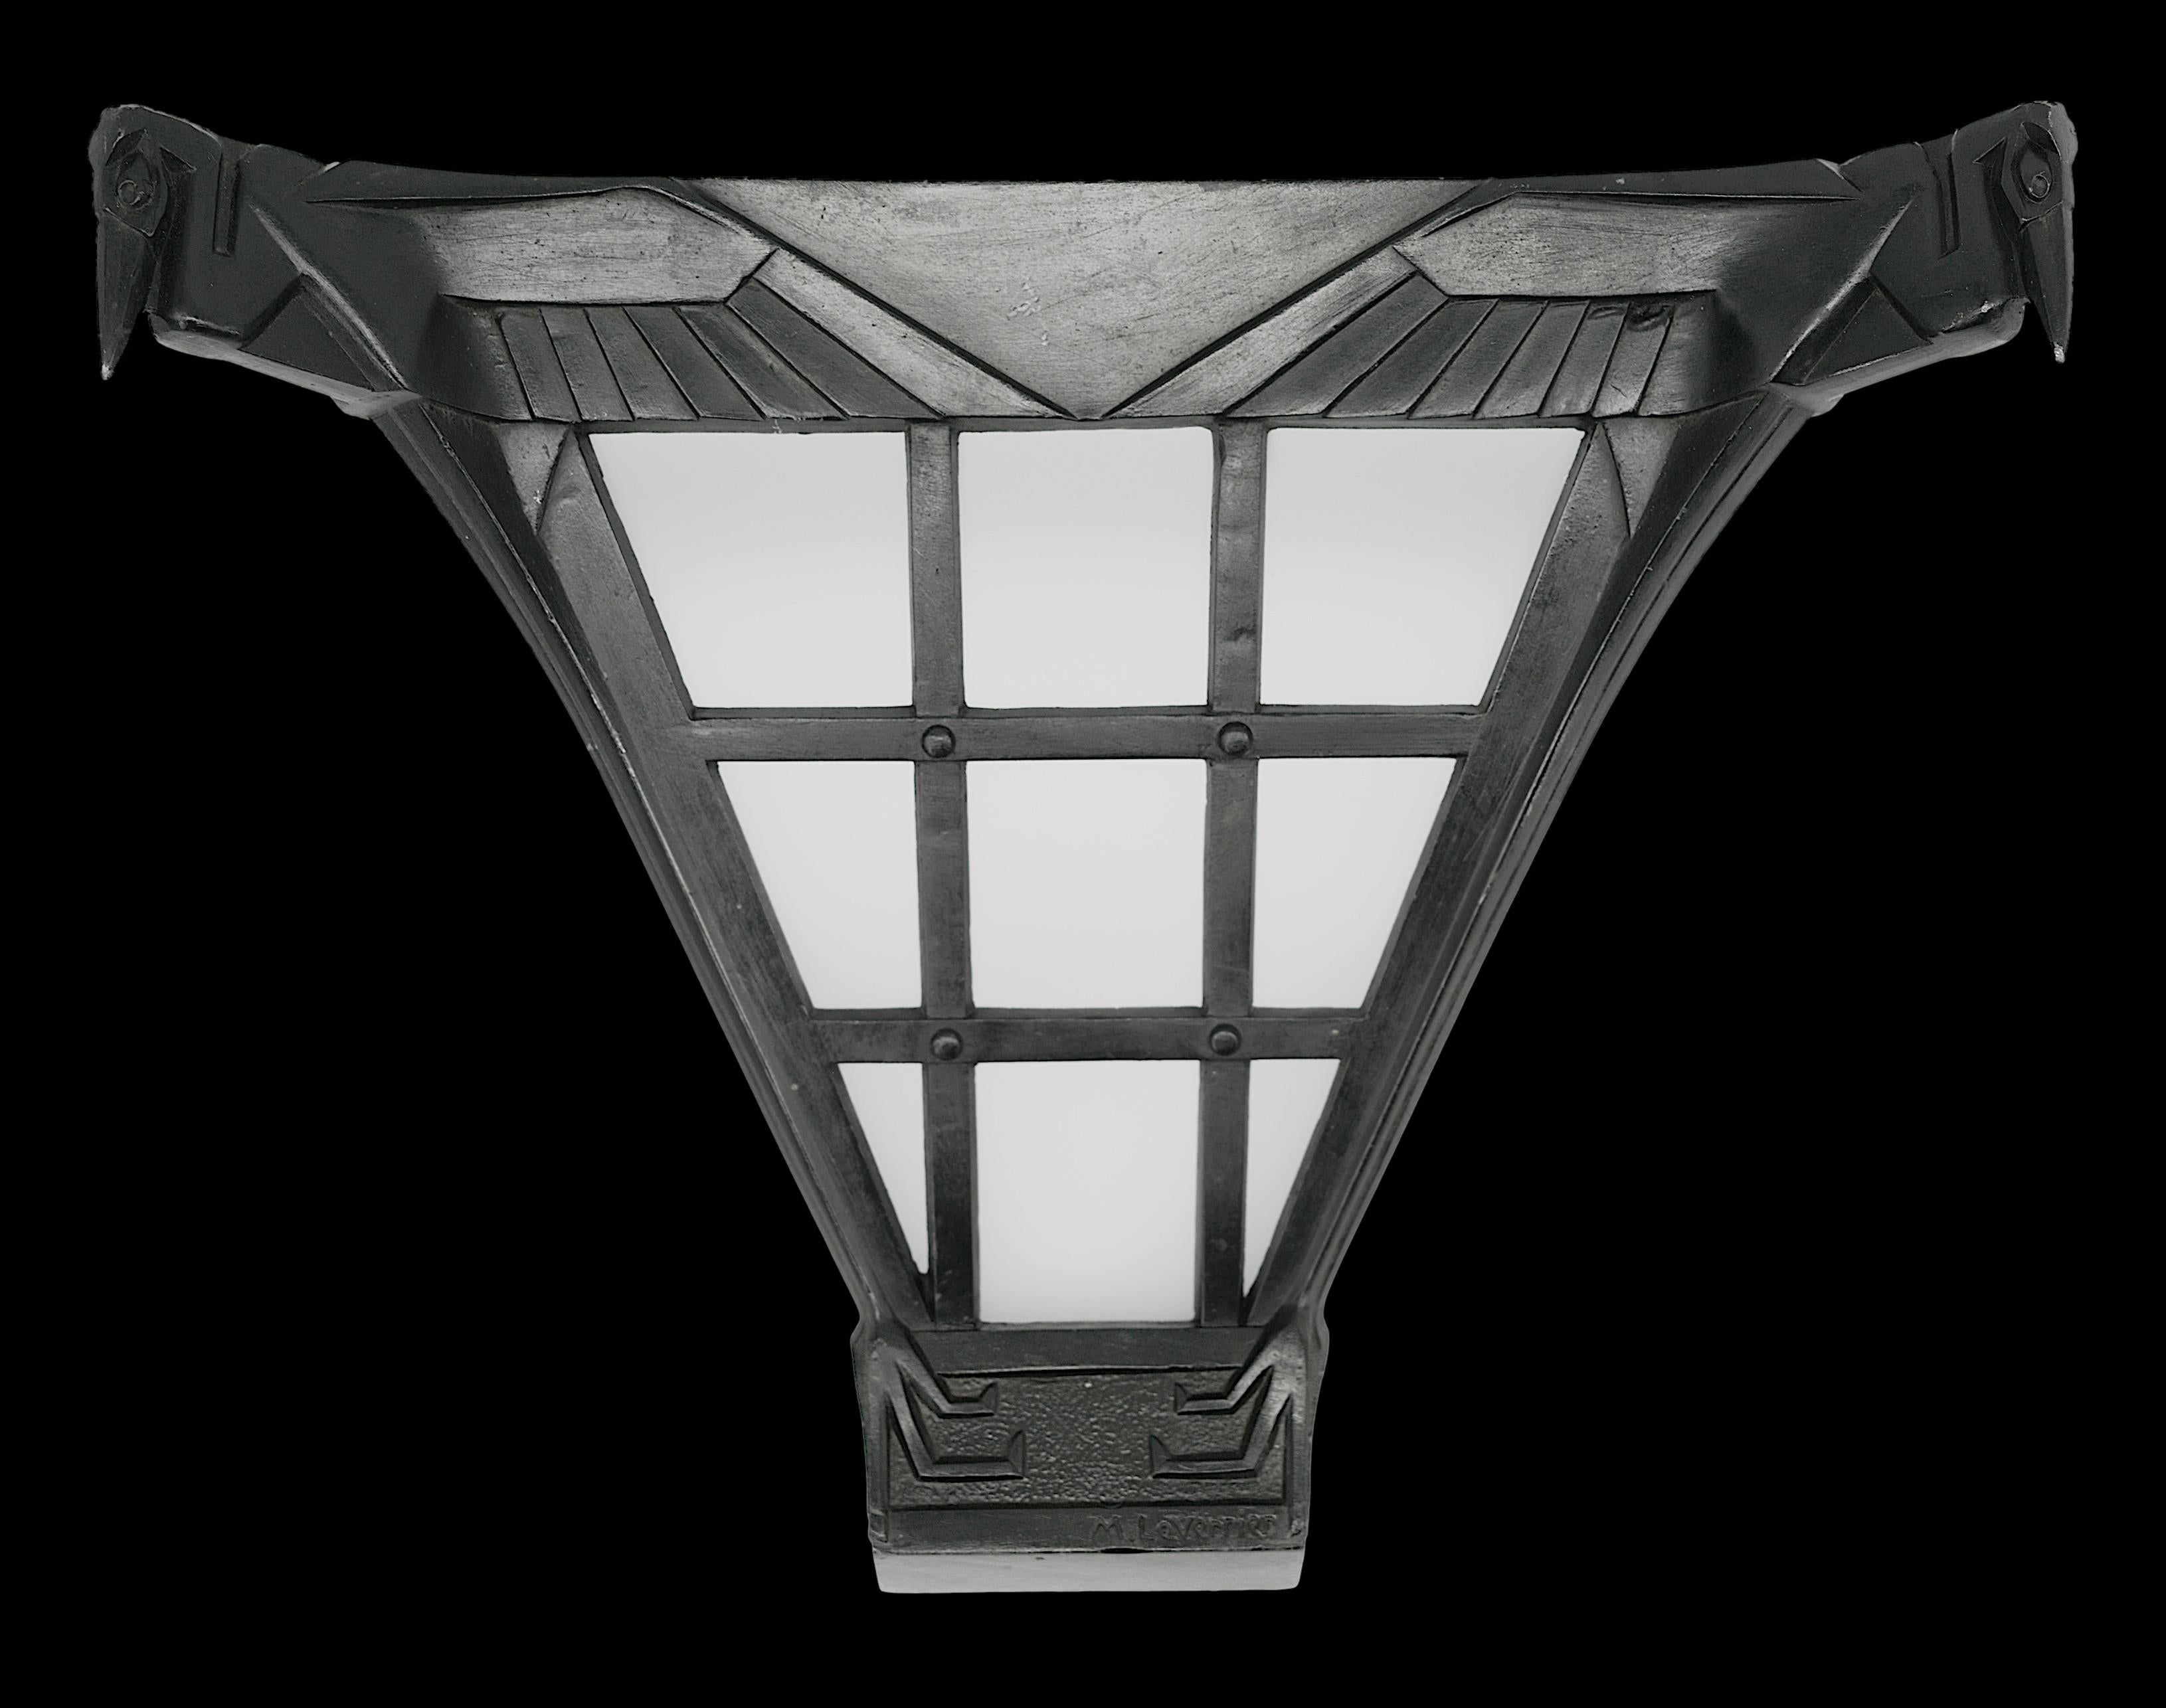 French Art Deco marabou wall sconce by MAX LE VERRIER, France, 1920s. MLV spelter and frosted glass. Lattice wall light with frosted glass. It is framed by 2 marabous in flight, their heads protruding from the upper corners, the wings spread on the